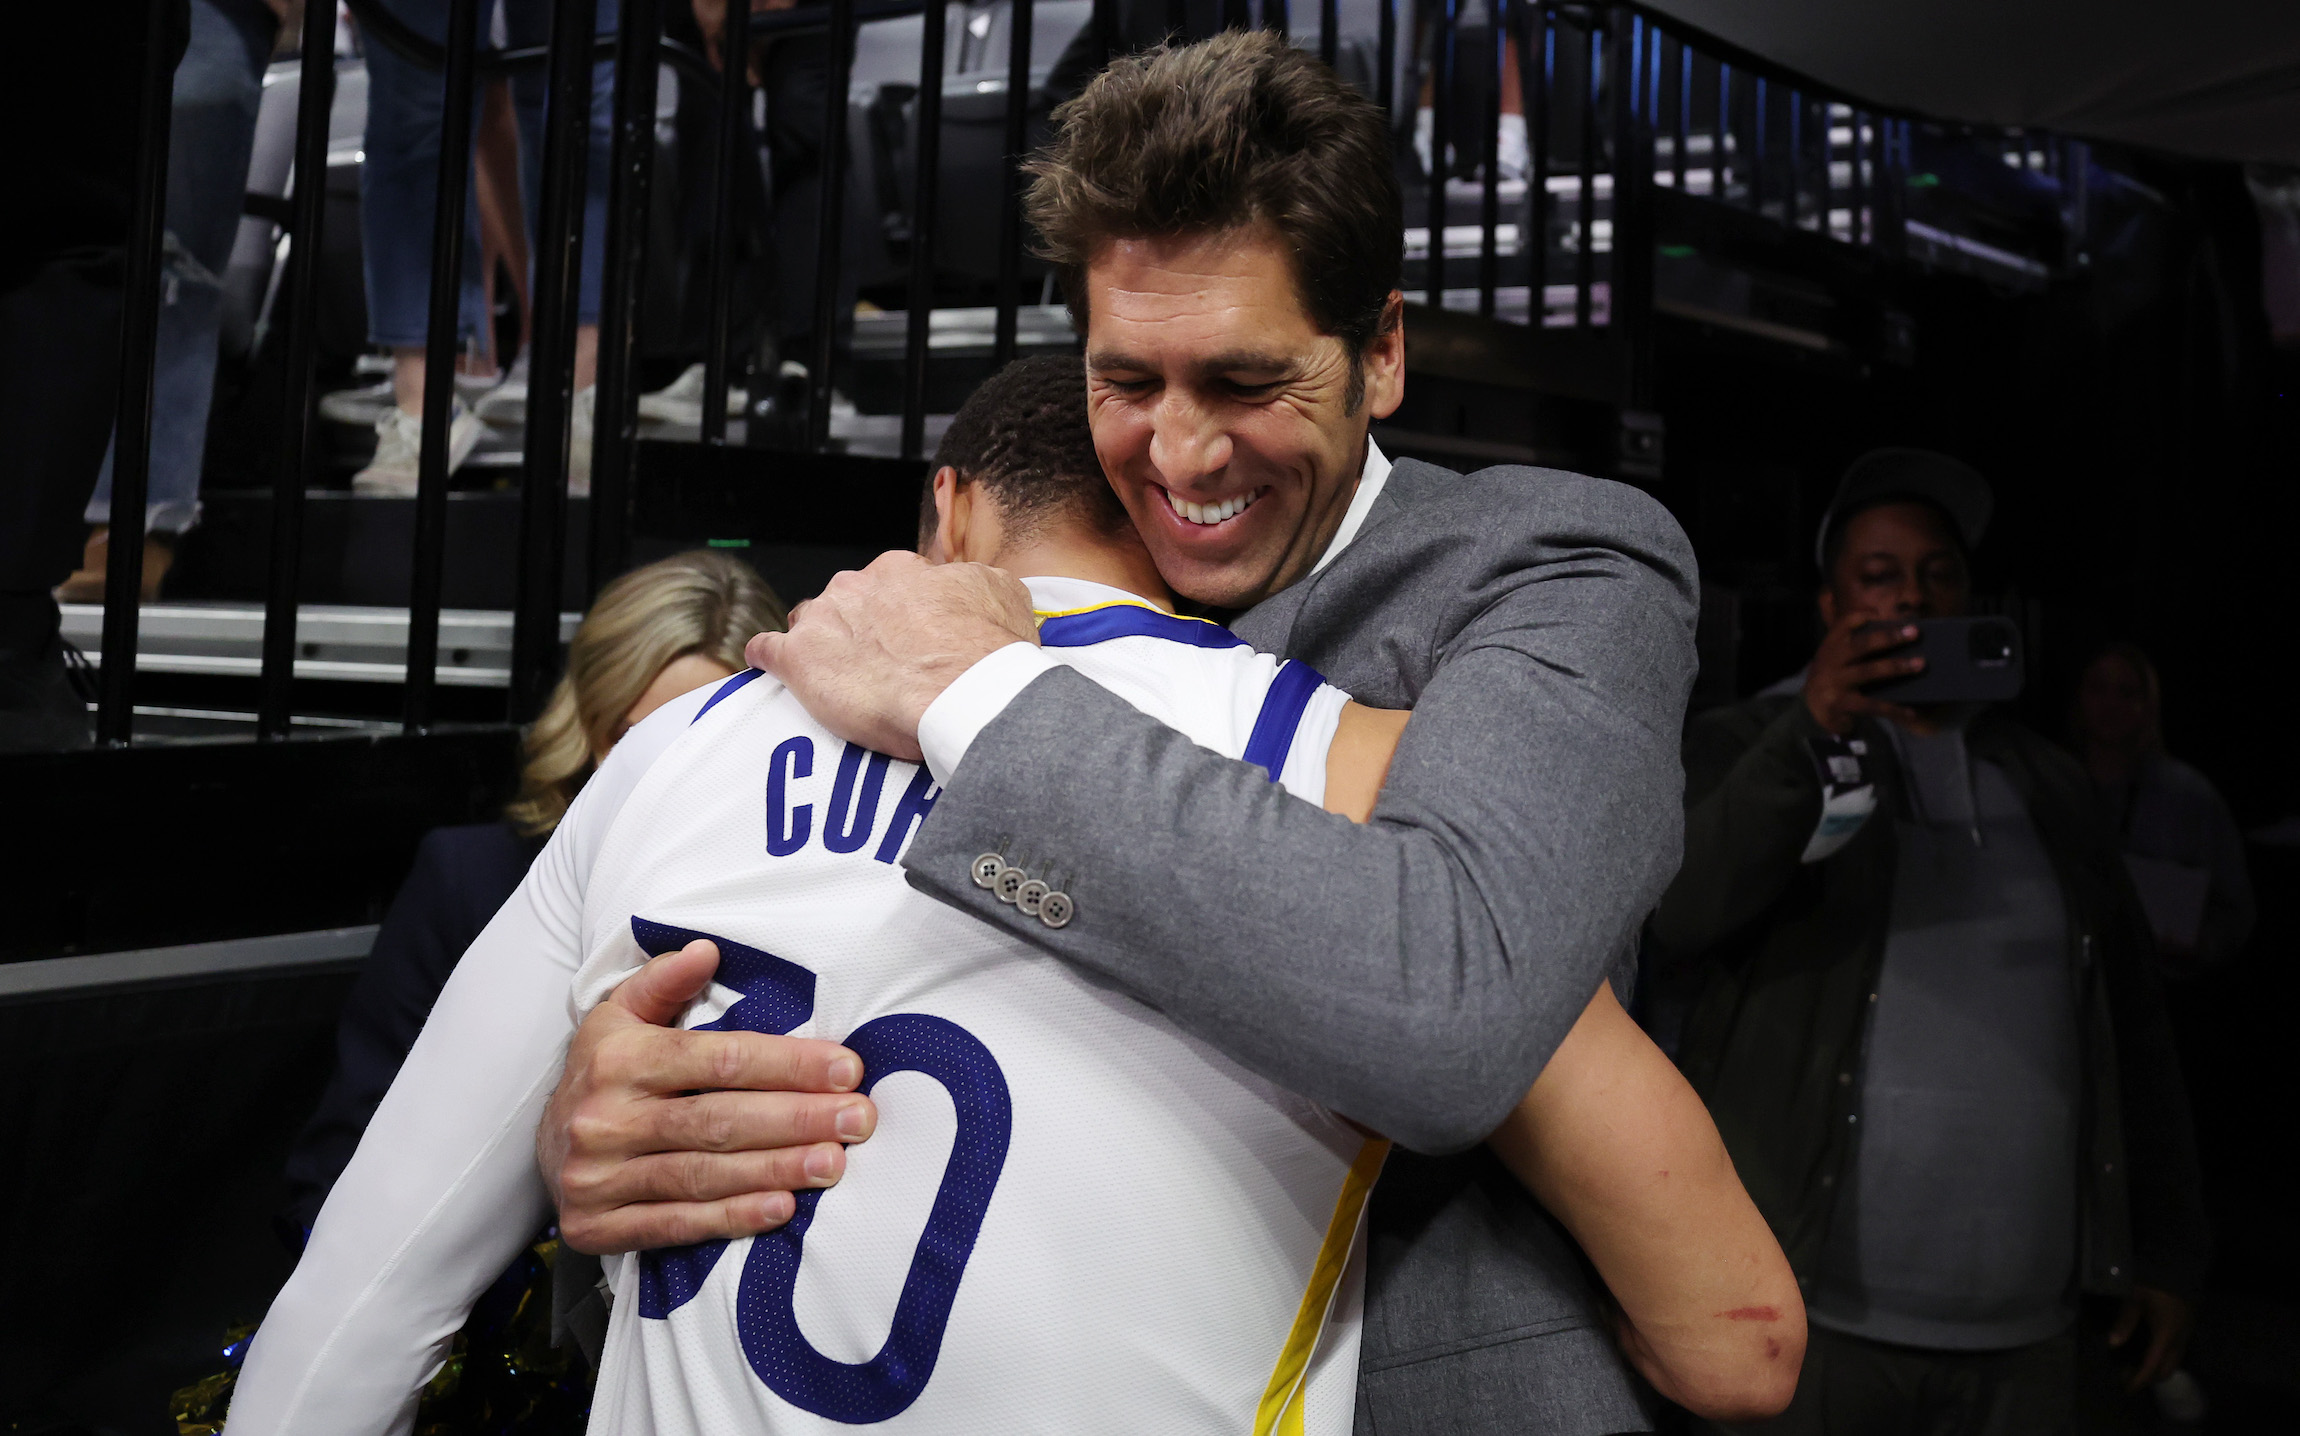 SACRAMENTO, CALIFORNIA - APRIL 30: Stephen Curry #30 of the Golden State Warriors hugs general manager Bob Myers after the Warriors defeated the Kings 120-100 in game seven of the Western Conference First Round Playoffs at Golden 1 Center on April 30, 2023 in Sacramento, California. NOTE TO USER: User expressly acknowledges and agrees that, by downloading and or using this photograph, User is consenting to the terms and conditions of the Getty Images License Agreement. (Photo by Ezra Shaw/Getty Images)